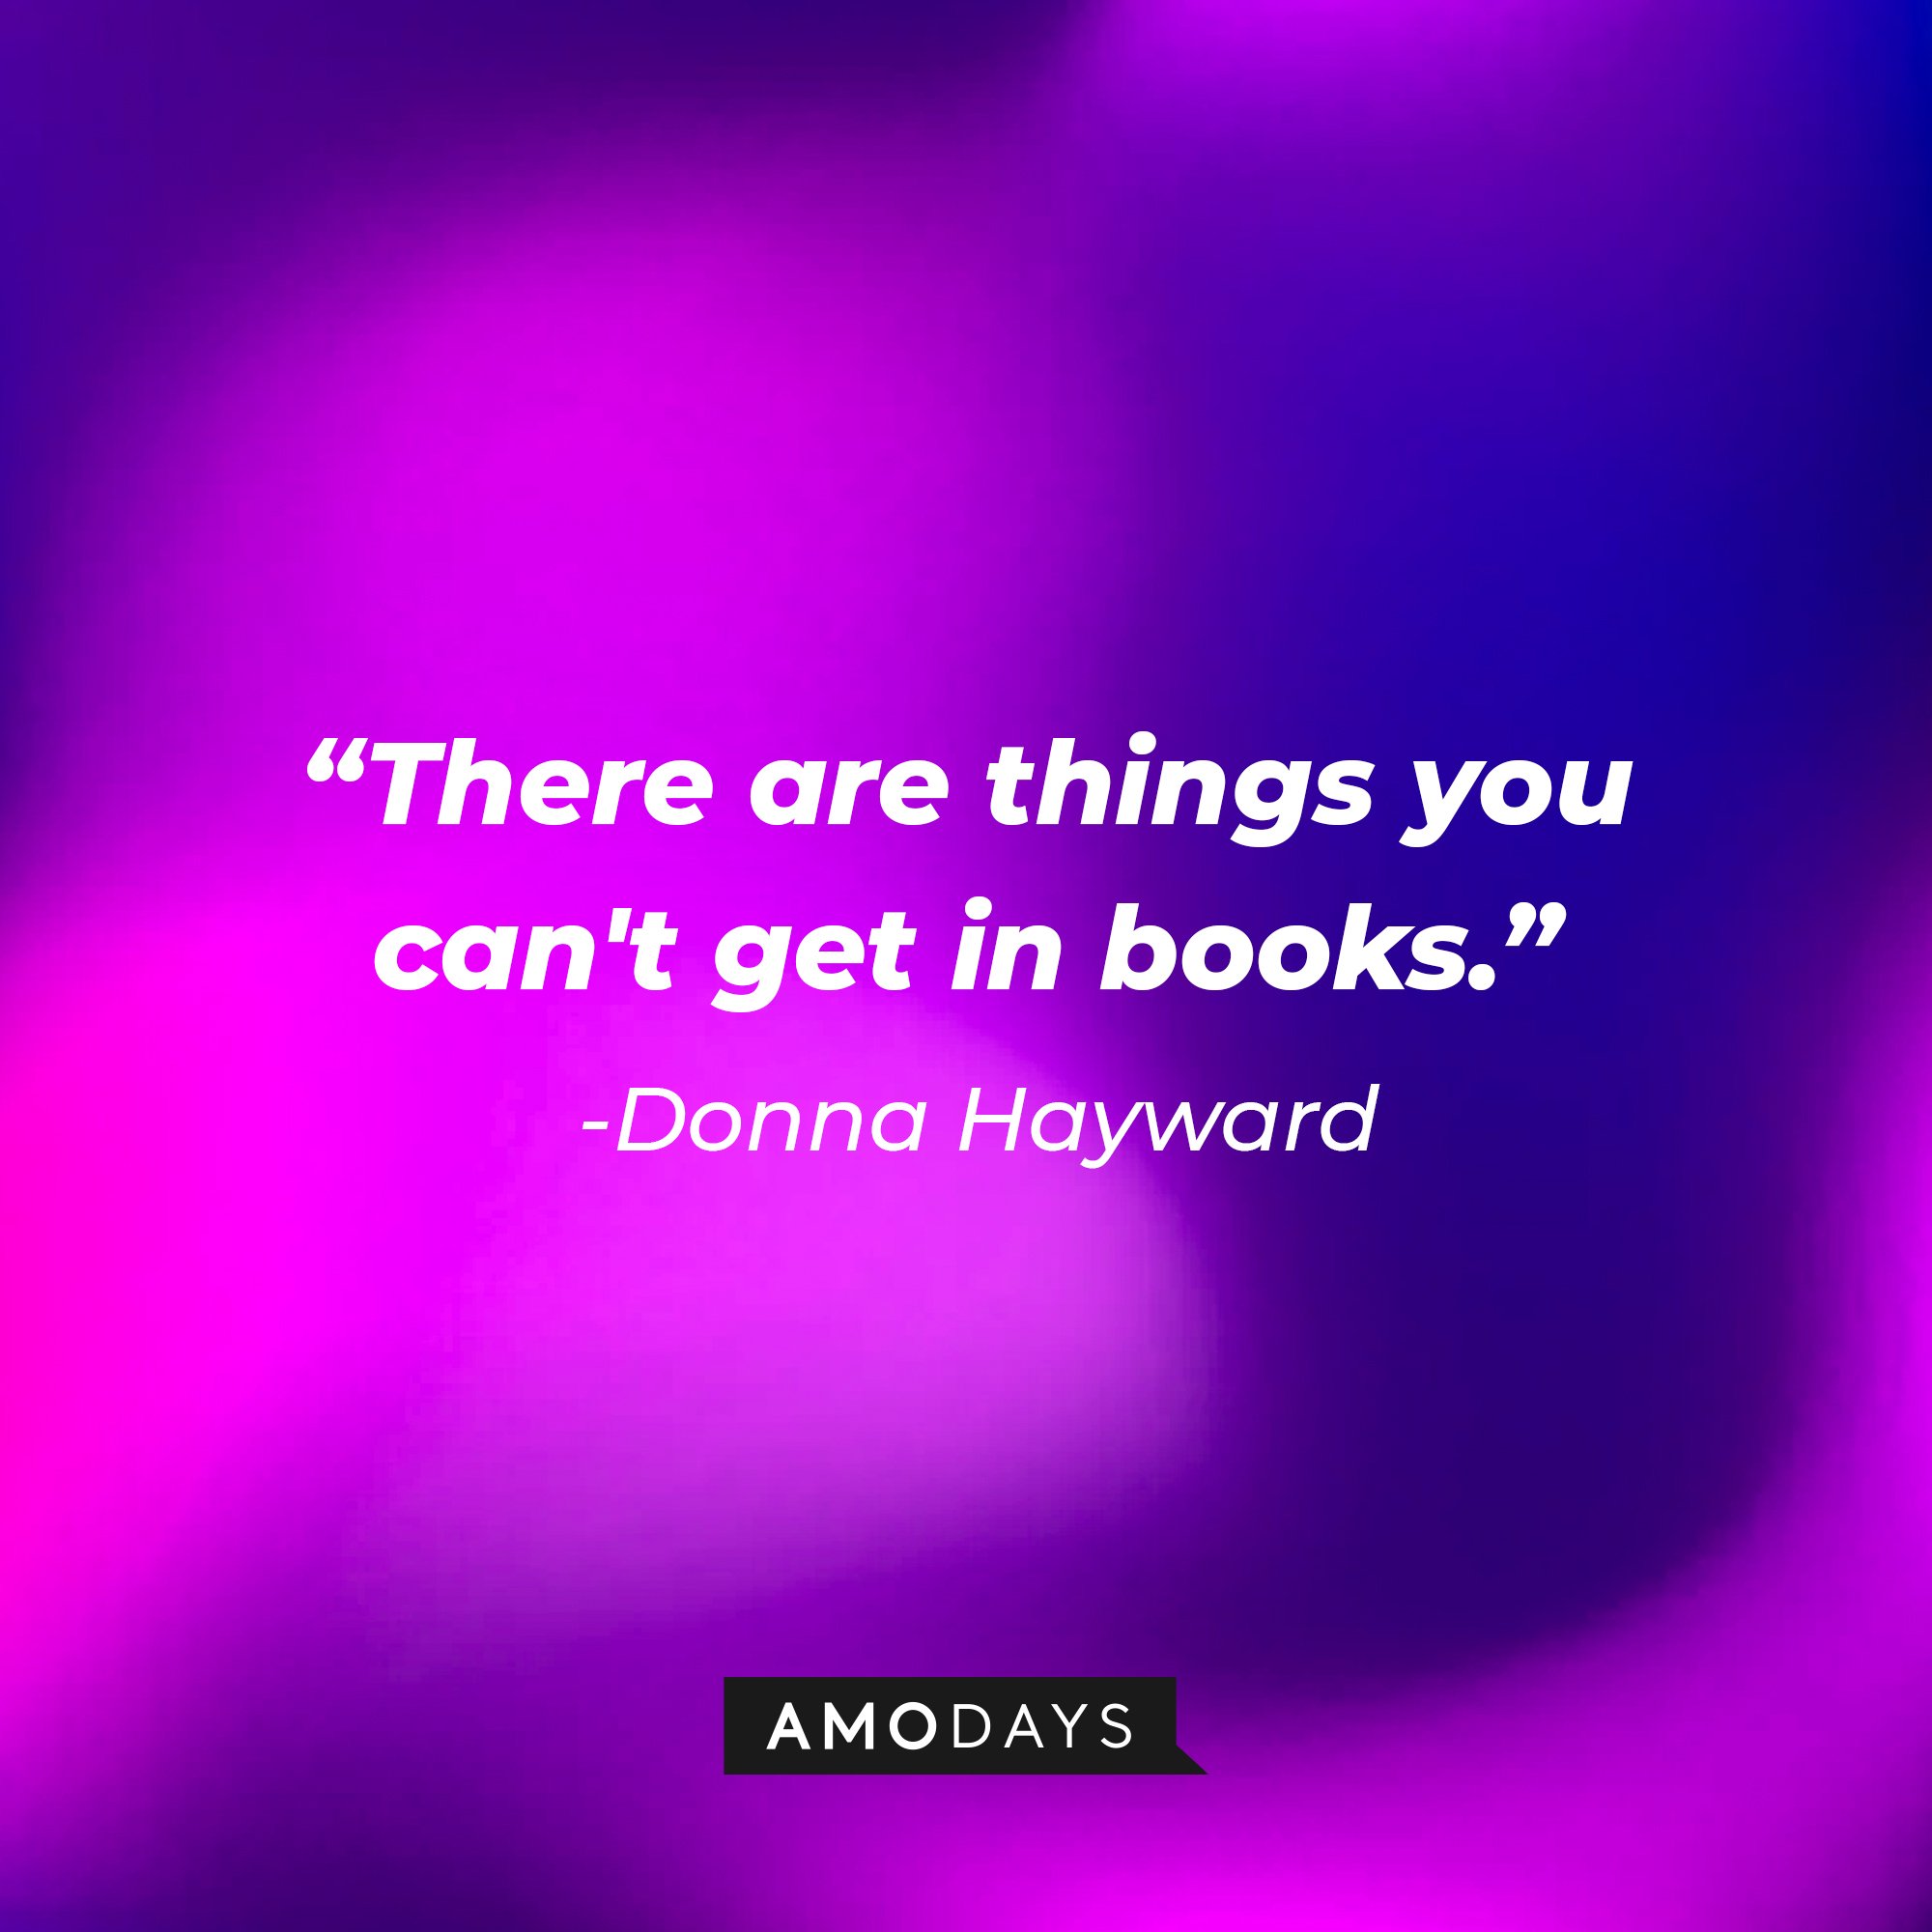 Donna Hayward’s quote: "There are things you can't get in books." | Image: AmoDays